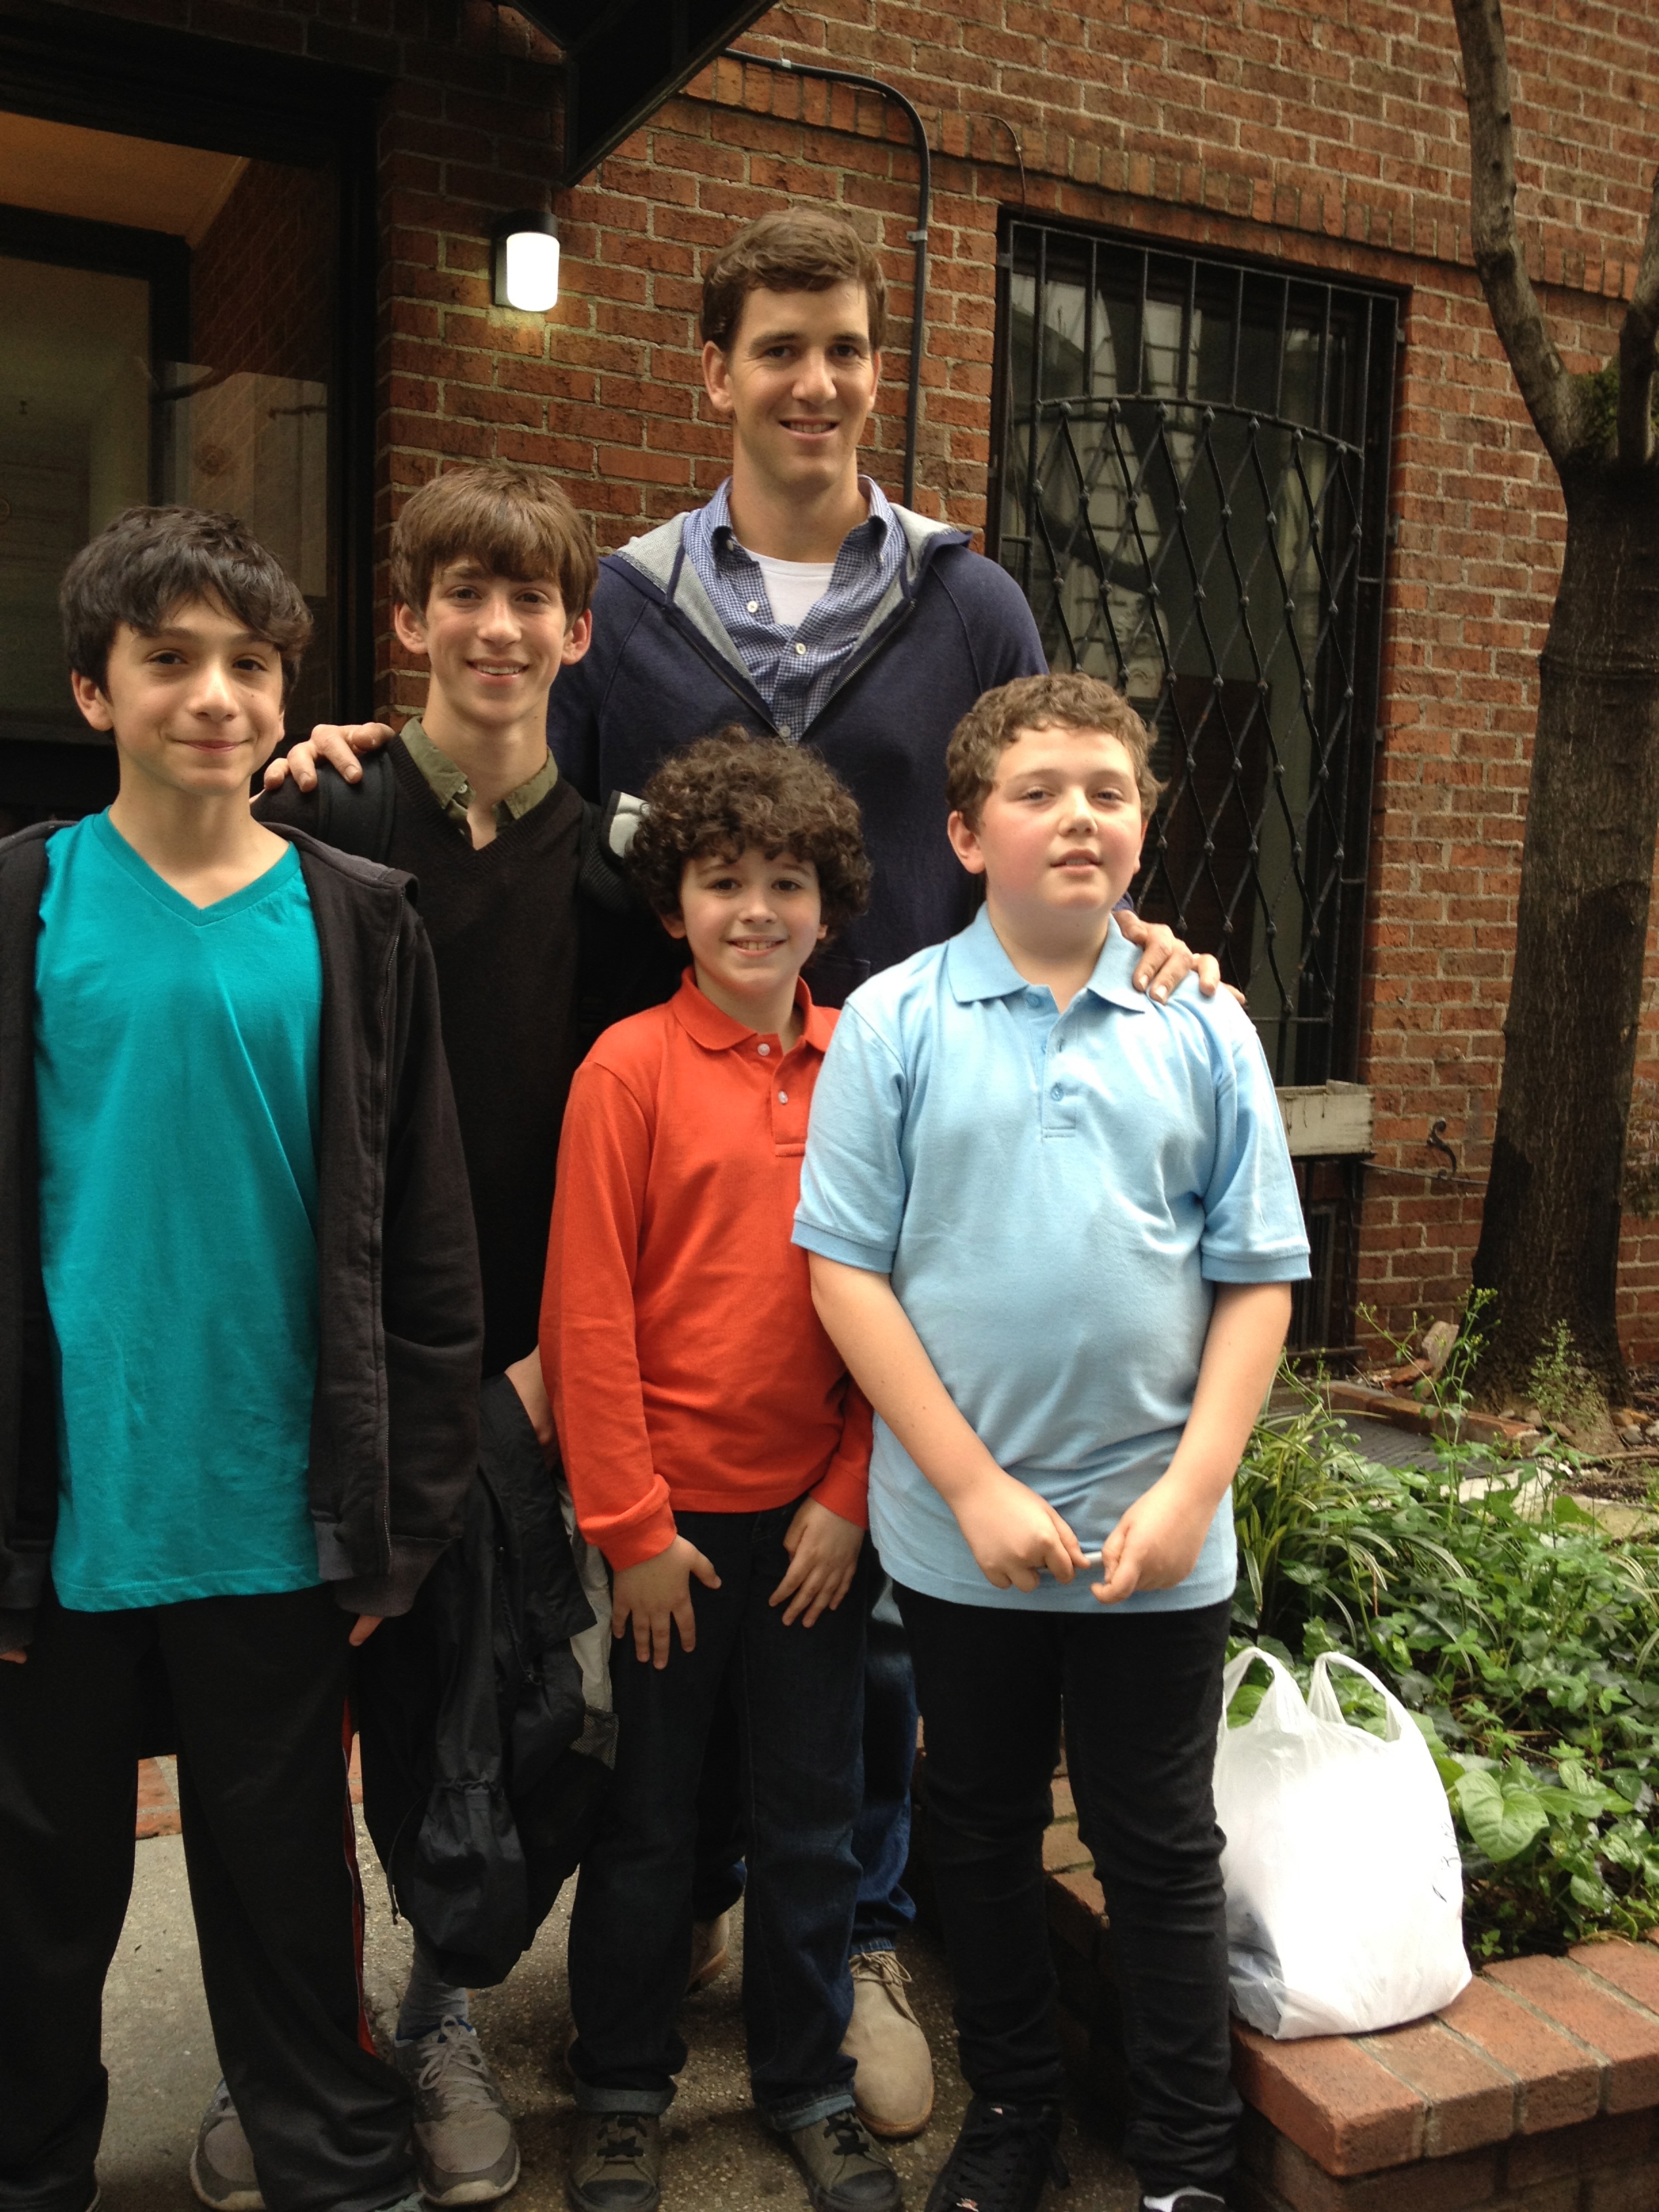 Joseph with Eli Manning and friends from 05/05/2012 Saturday Night Live